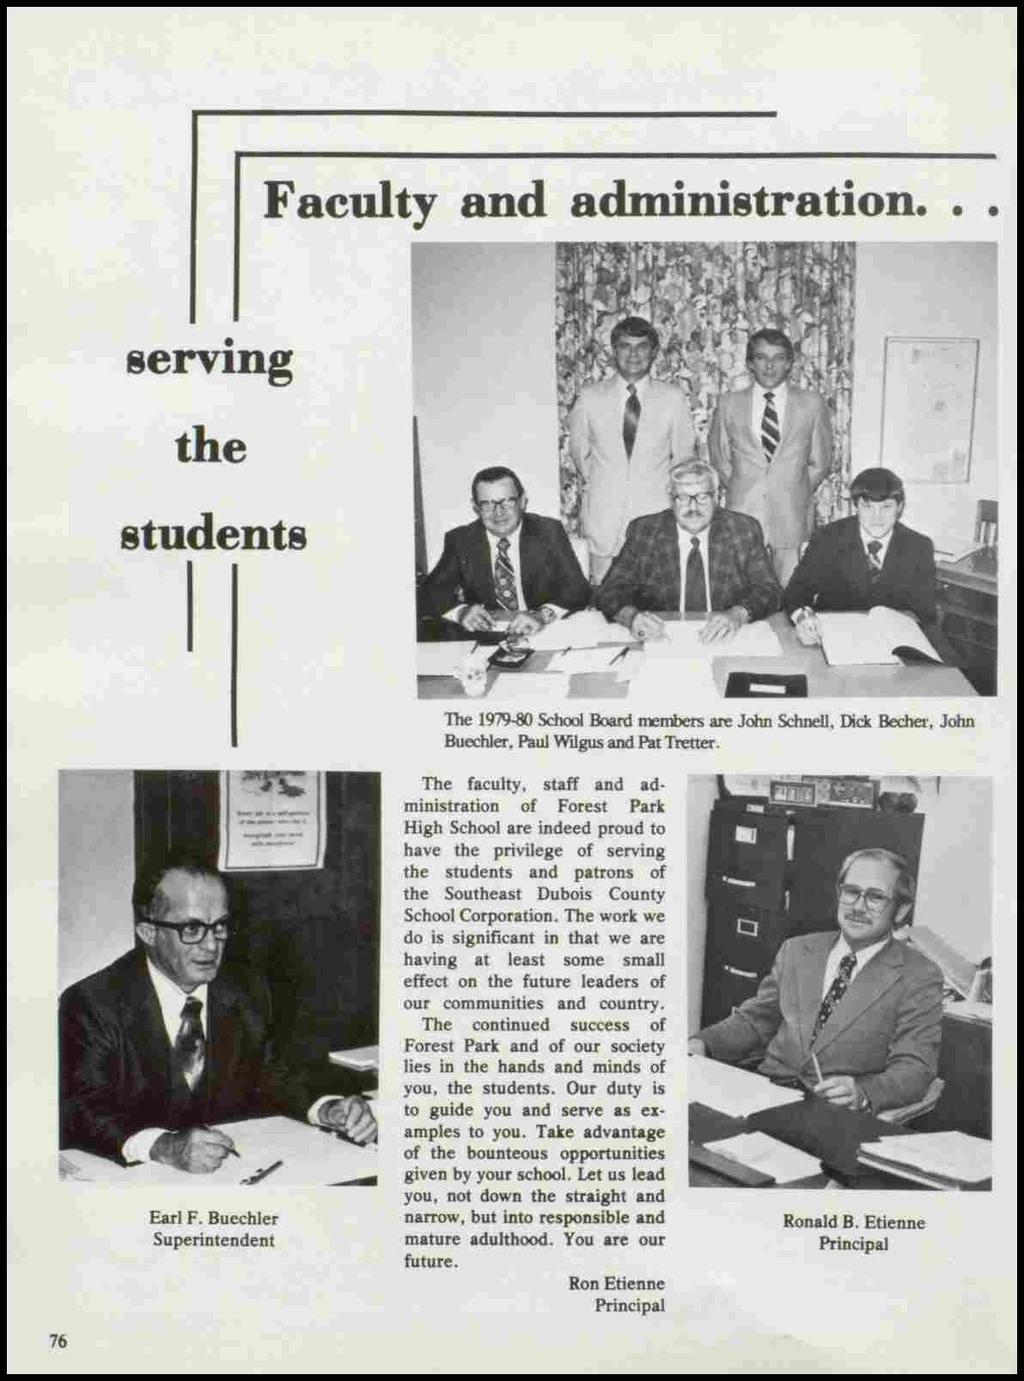 Faculty and administration. serving the students The 1979-80 School Board members are John Schnell, Dick Becher, John Buechler, Paul Wtlgus and Pat Tretter. Earl F.